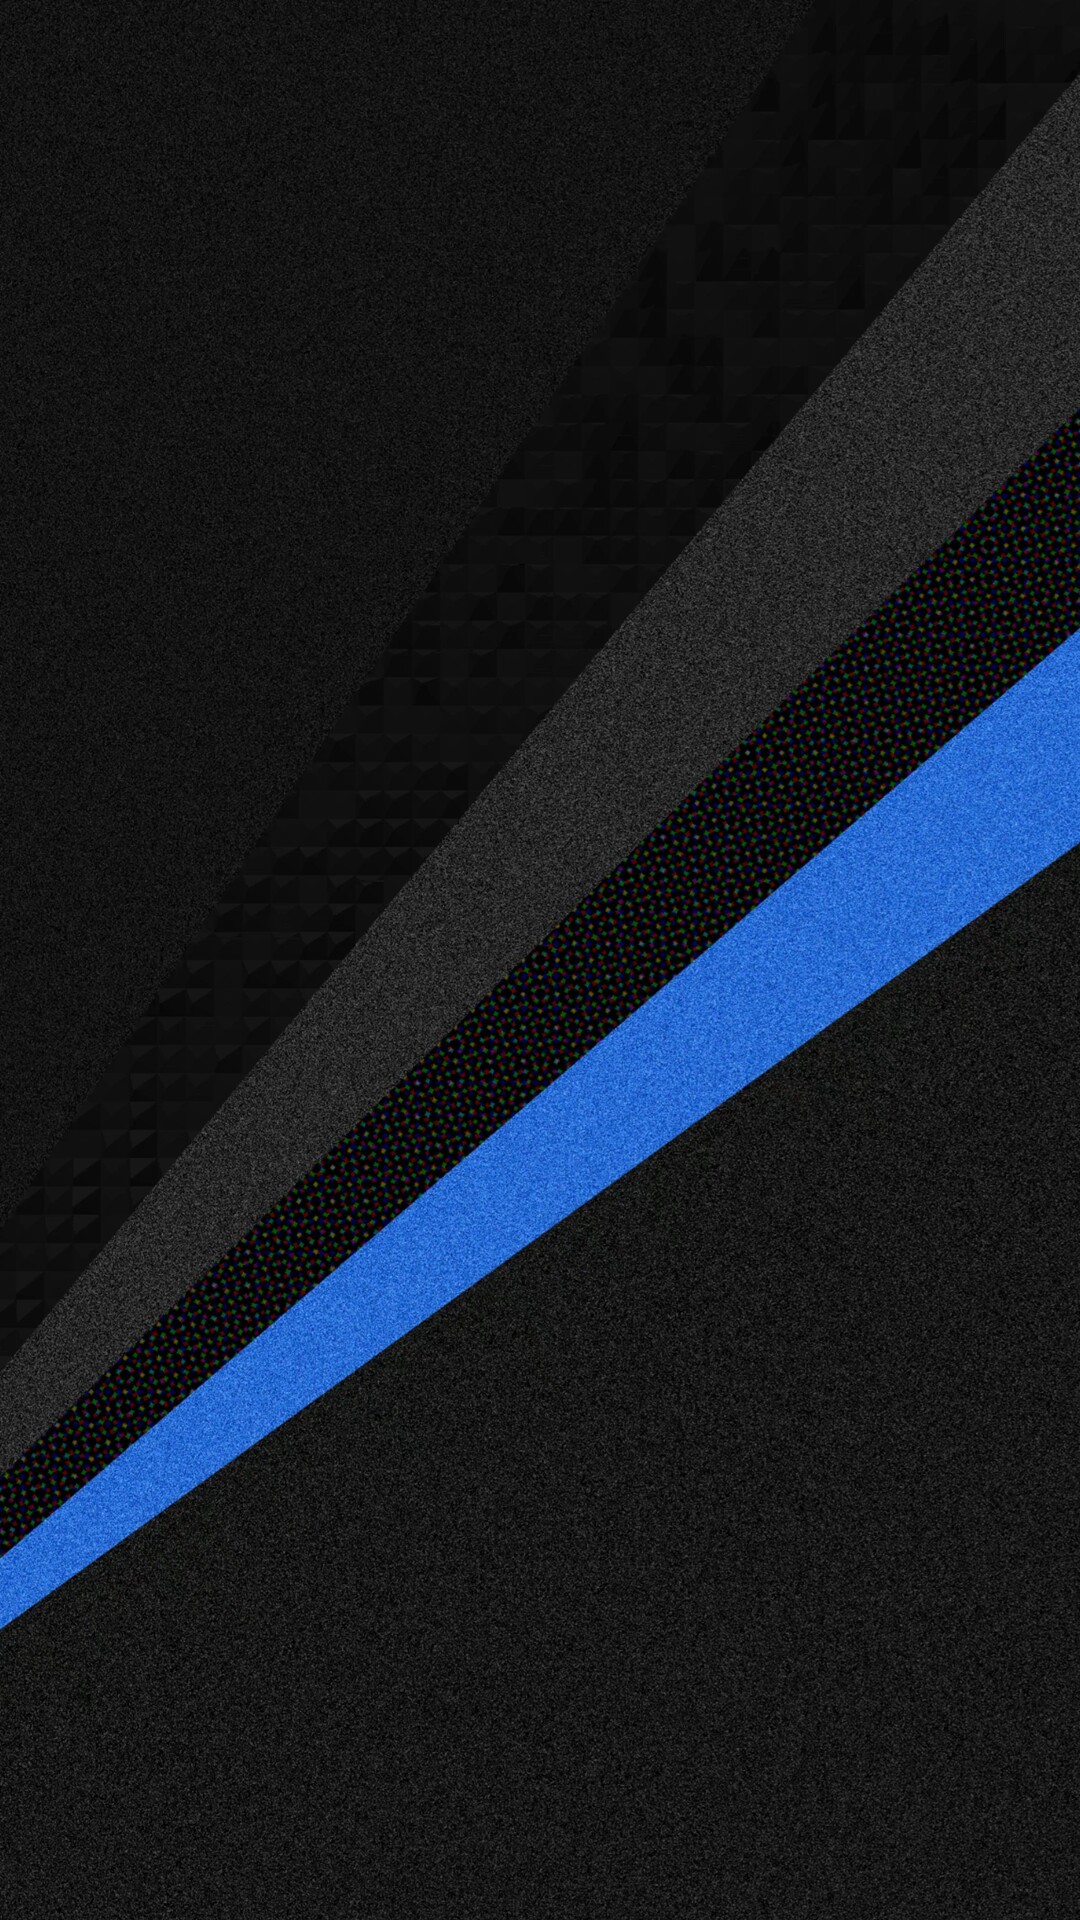 1080x1920 Material Design, Real Madrid, Phone Wallpapers, Samsung, Chevron, Minimal,  Funds, Choice